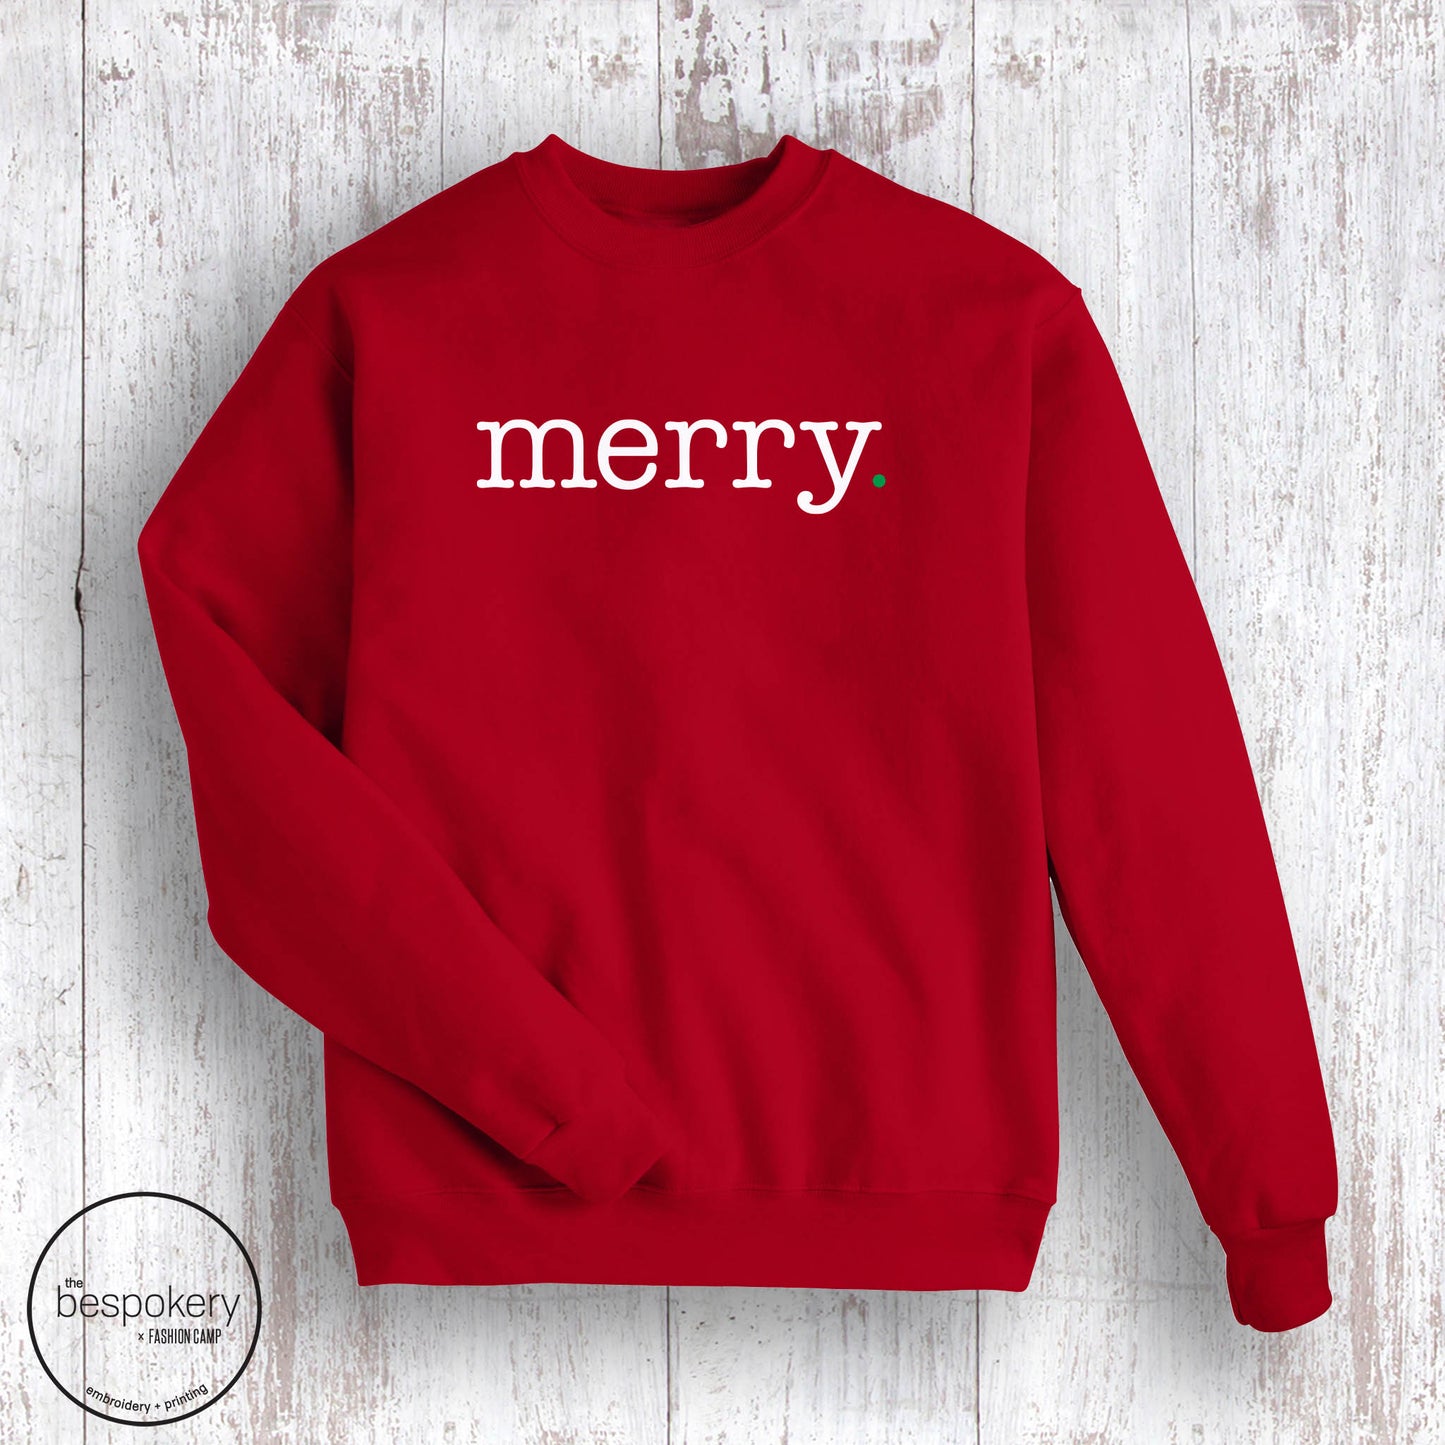 Merry. Sweatshirt- Red (Youth + Adult)